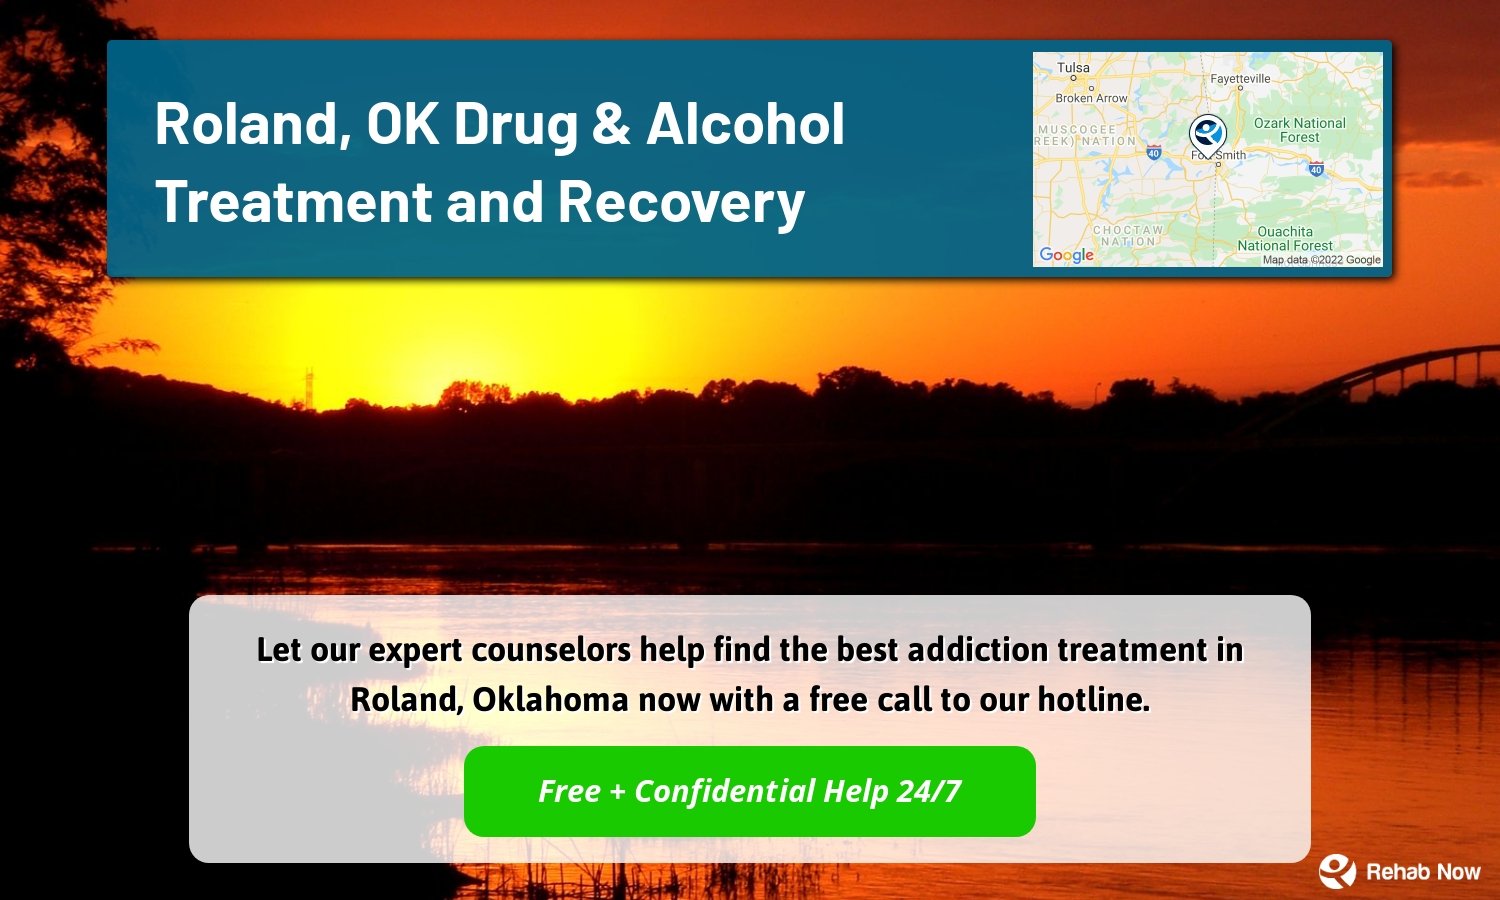 Let our expert counselors help find the best addiction treatment in Roland, Oklahoma now with a free call to our hotline.